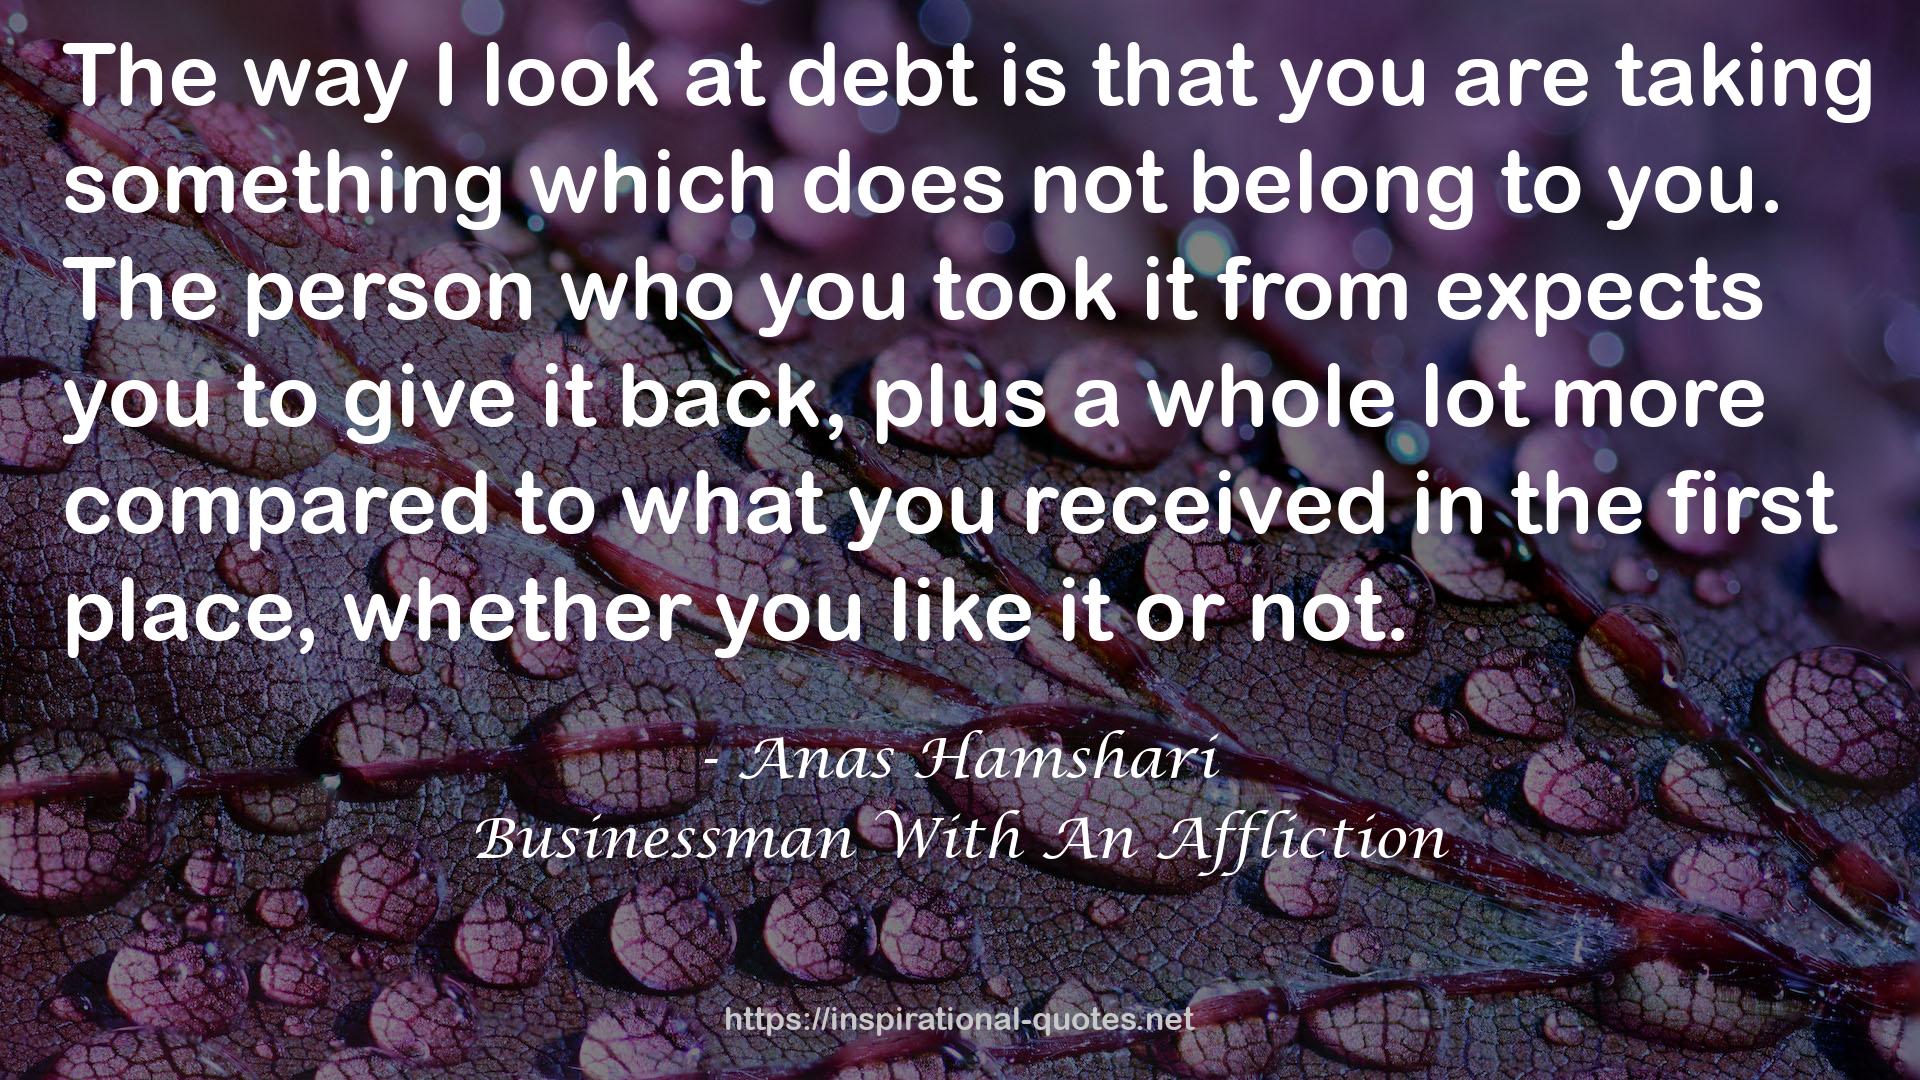 Businessman With An Affliction QUOTES